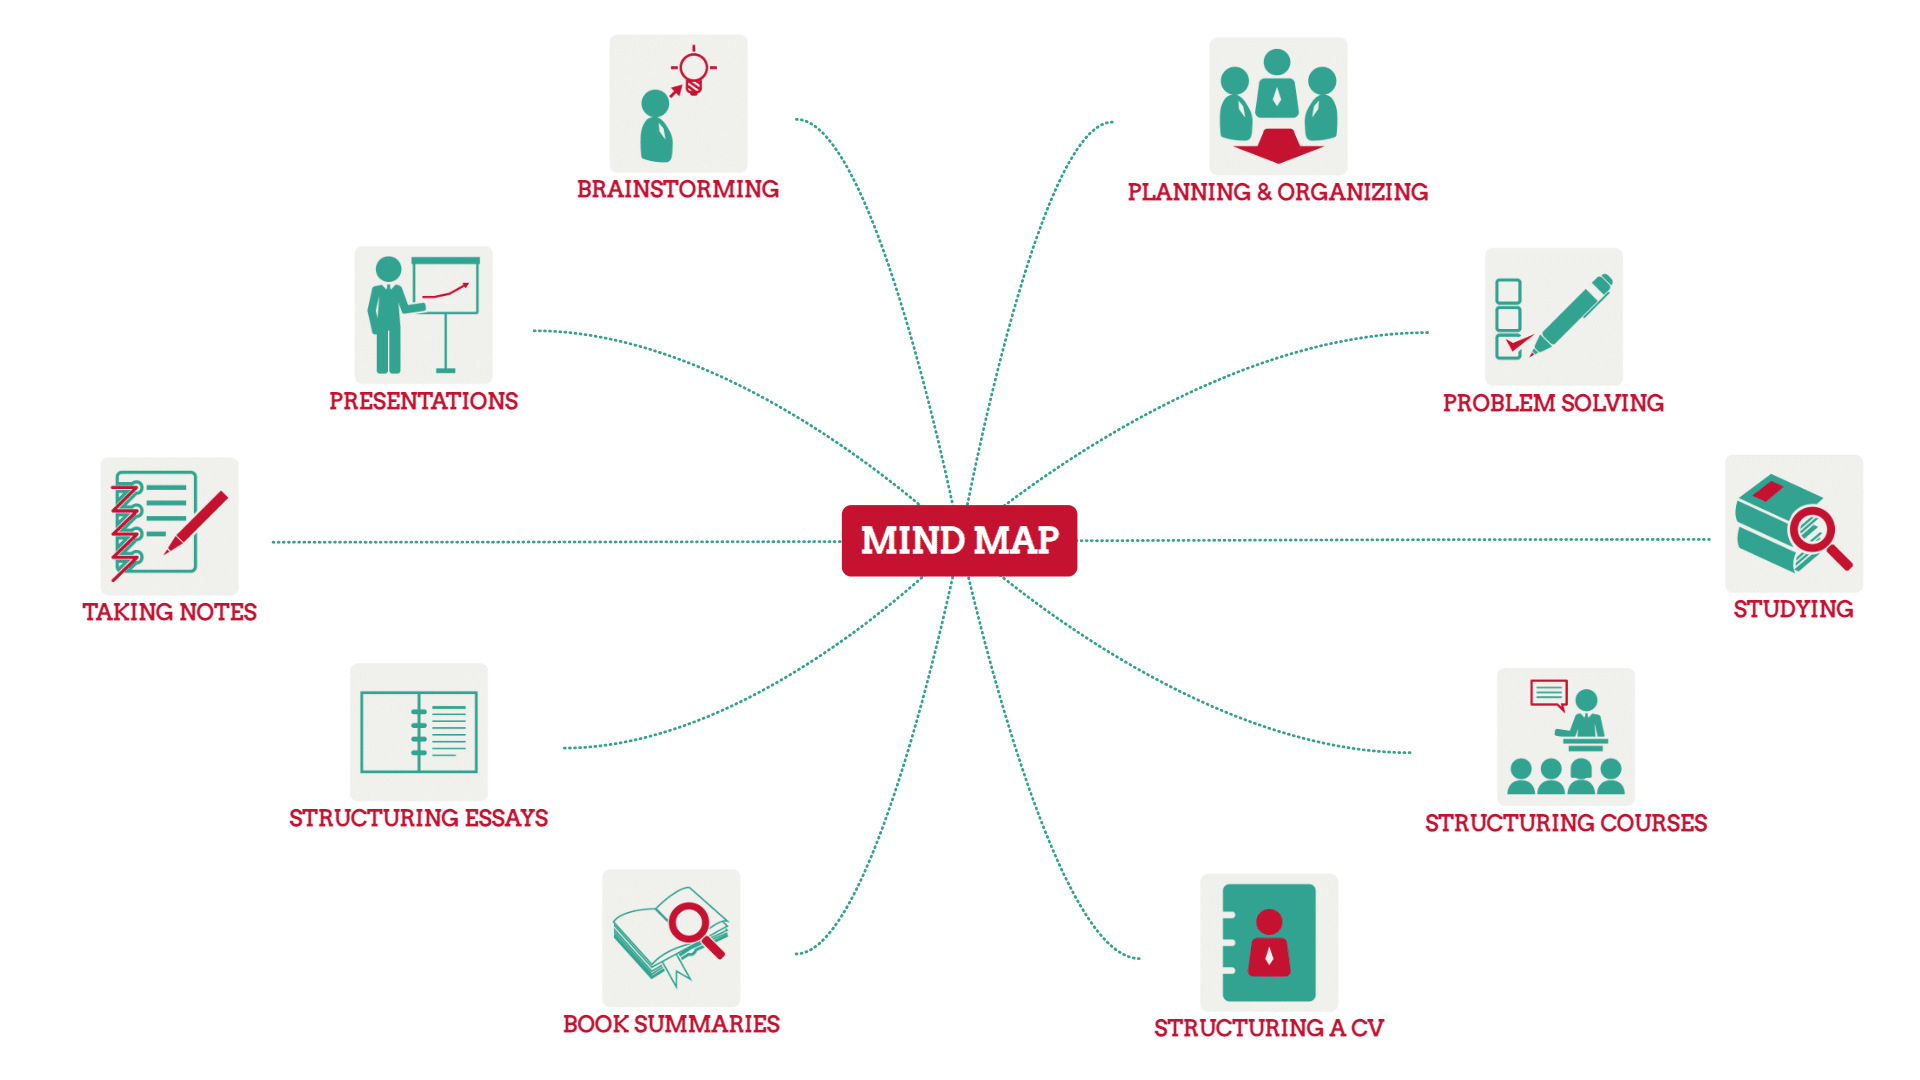 What to use Mind Maps for?